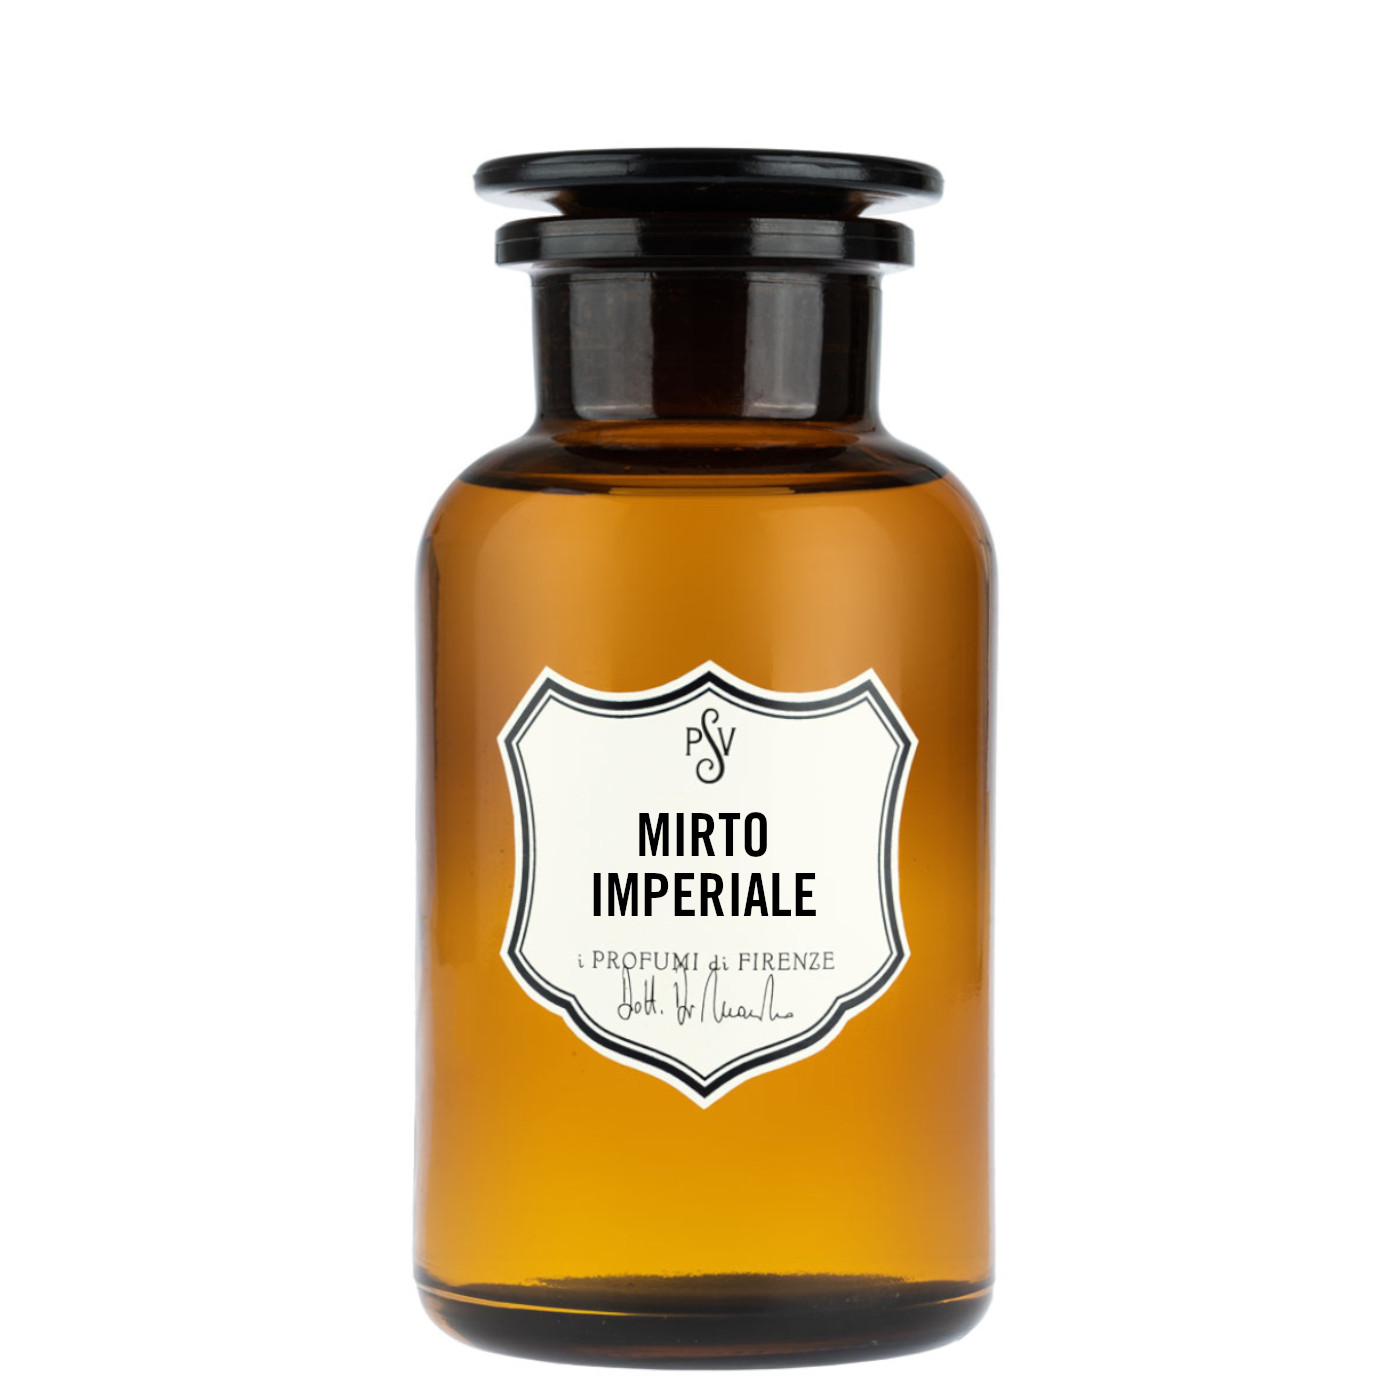 MIRTO IMPERIALE - Home Fragrance-4511